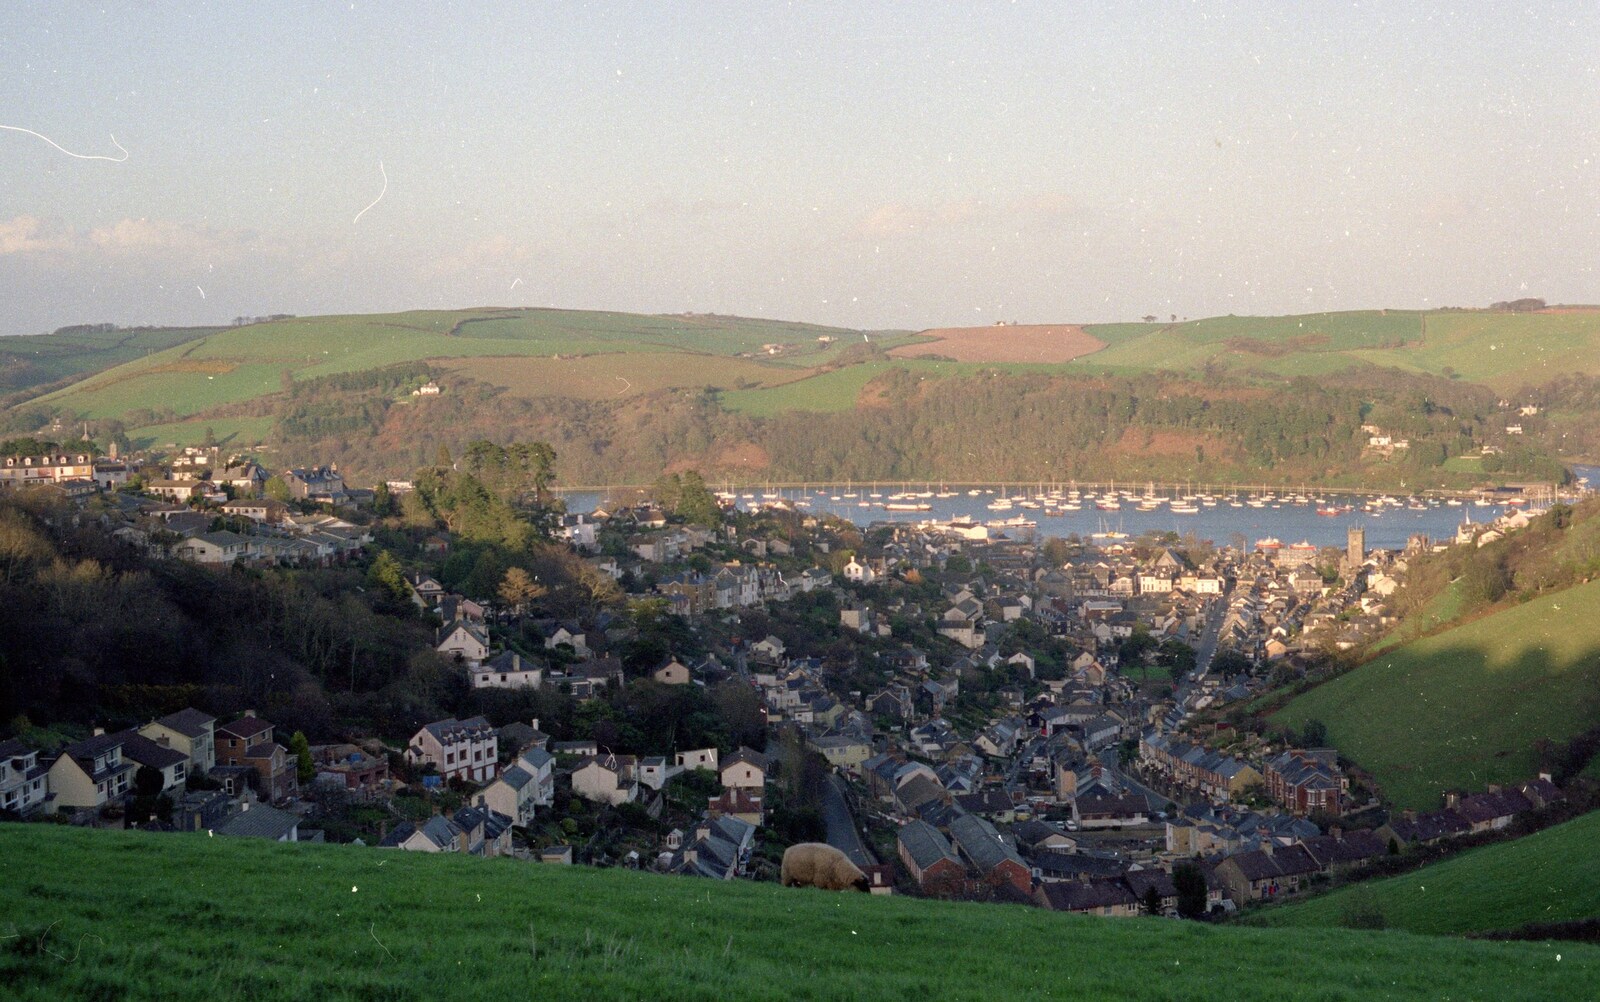 Uni: Dartmoor Night and Day, Dartmouth and a bit of Jiu Jitsu, Devon - 29th April 1989: The town of Dartmouth, nestled in a river valley